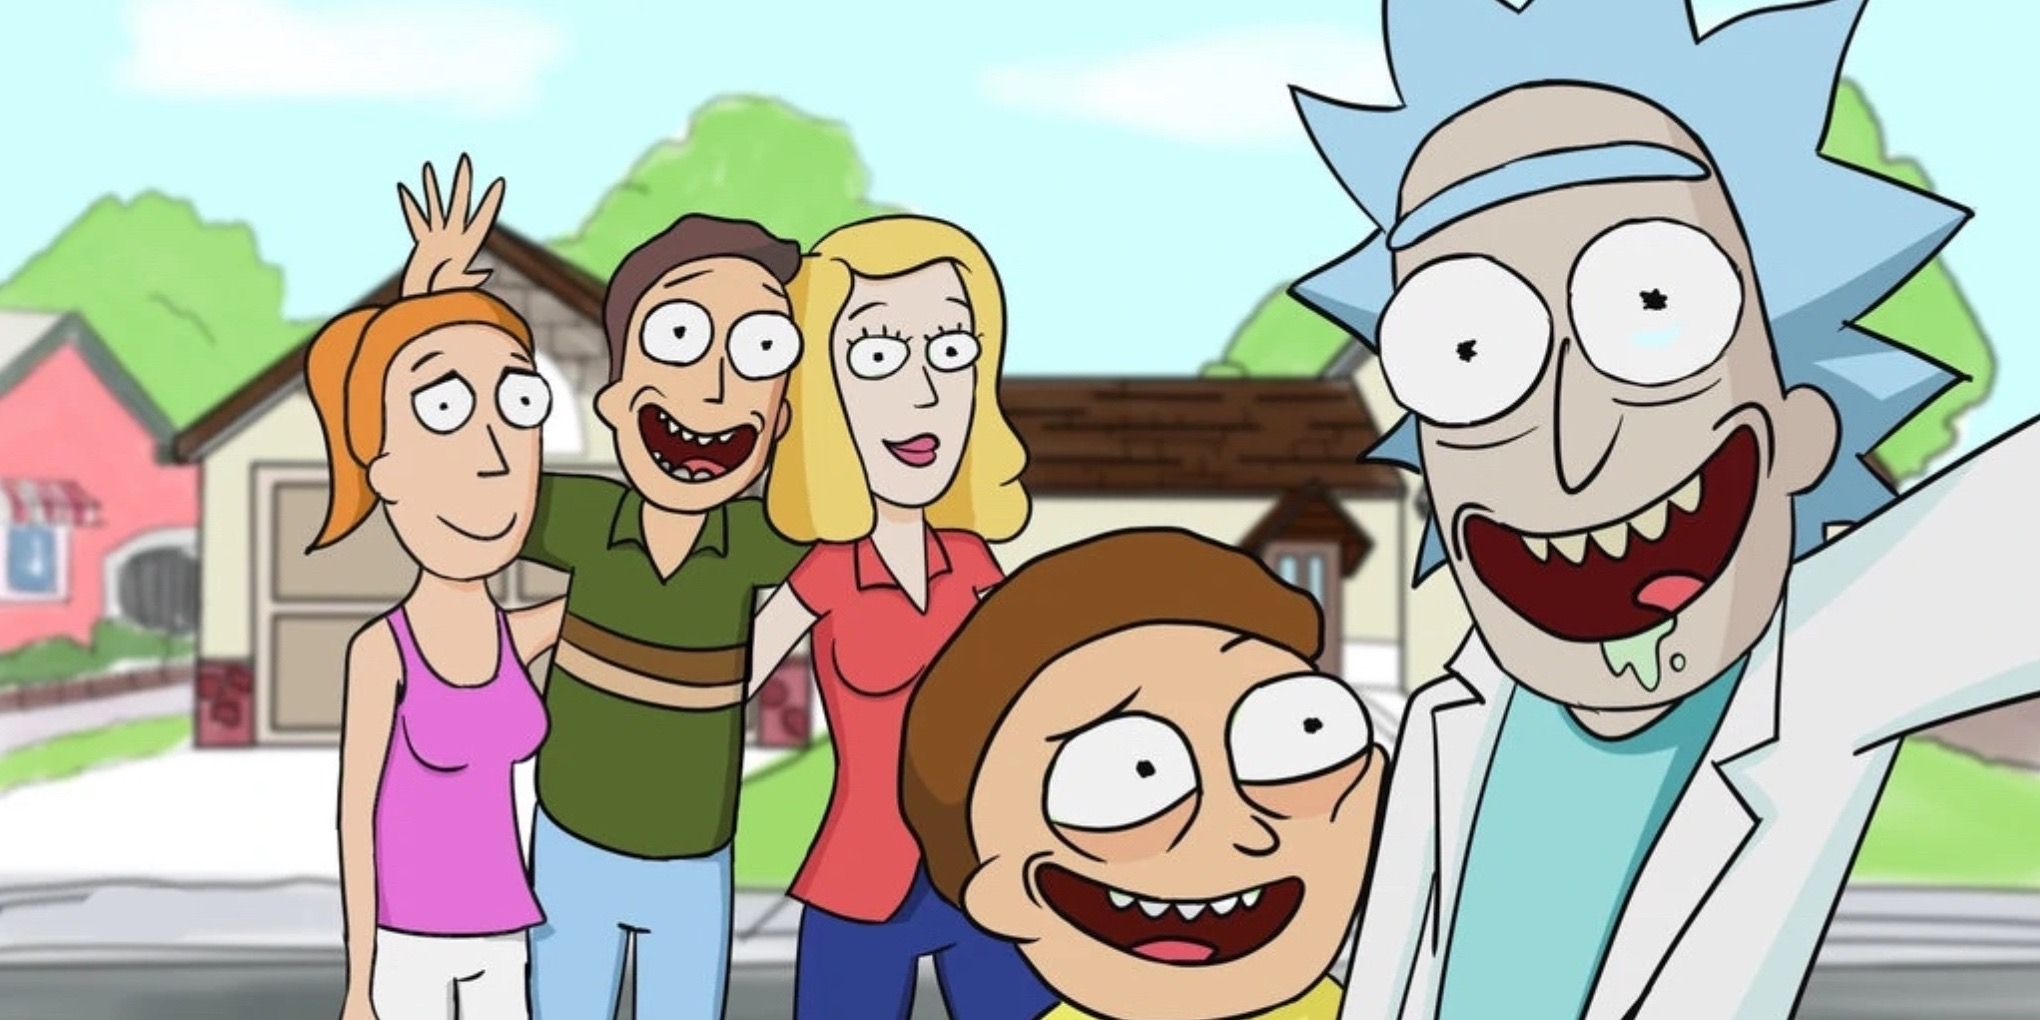 Rick Sanchez and the Smith Family on Rick and Morty